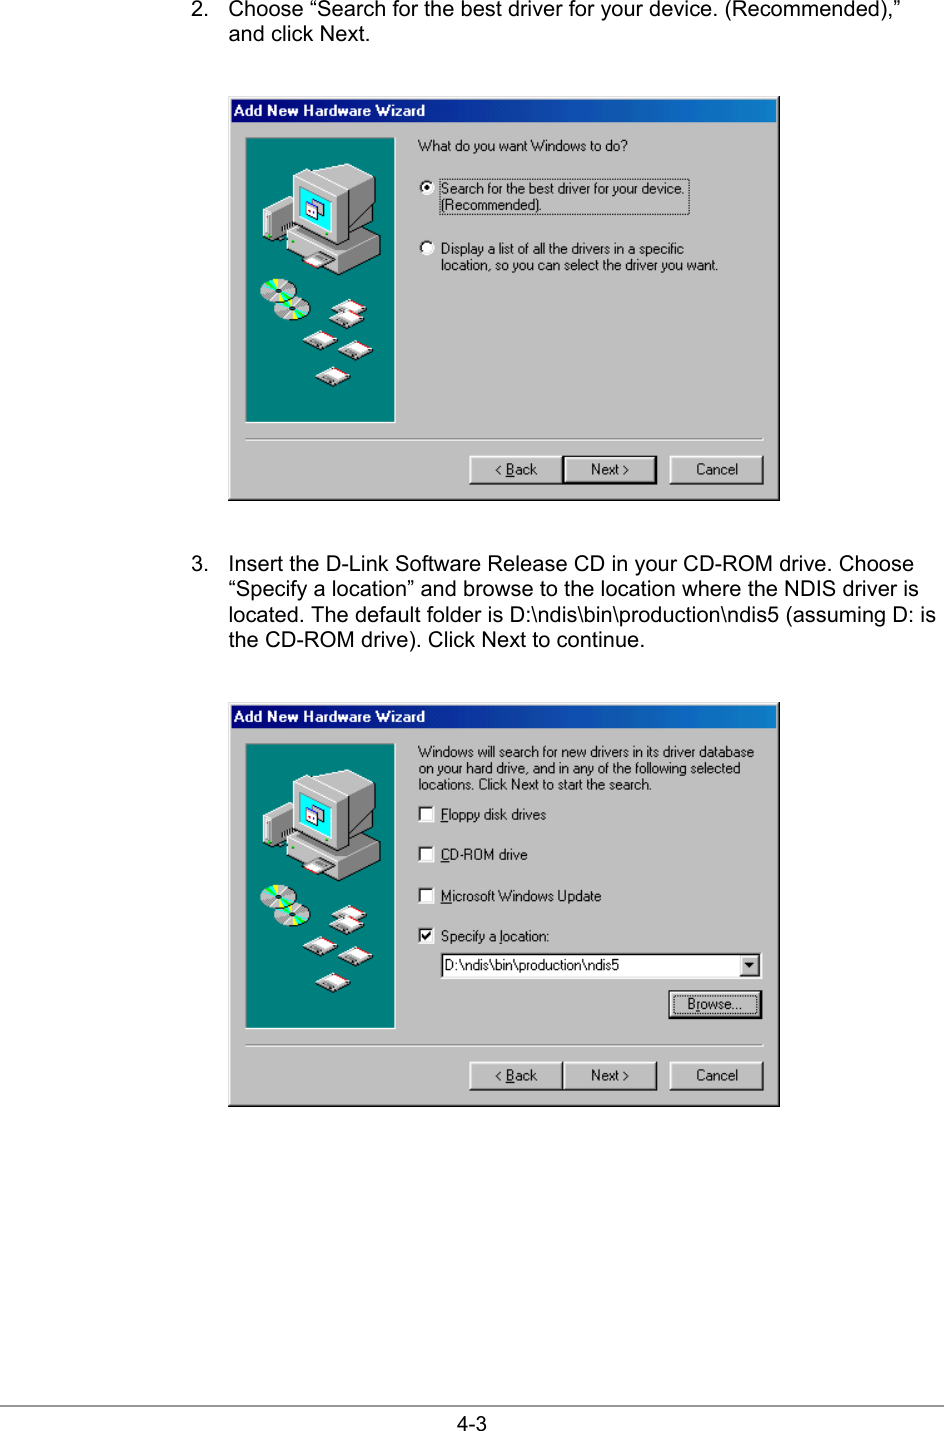  4-3 2.  Choose “Search for the best driver for your device. (Recommended),” and click Next.   3.  Insert the D-Link Software Release CD in your CD-ROM drive. Choose “Specify a location” and browse to the location where the NDIS driver is located. The default folder is D:\ndis\bin\production\ndis5 (assuming D: is the CD-ROM drive). Click Next to continue.   